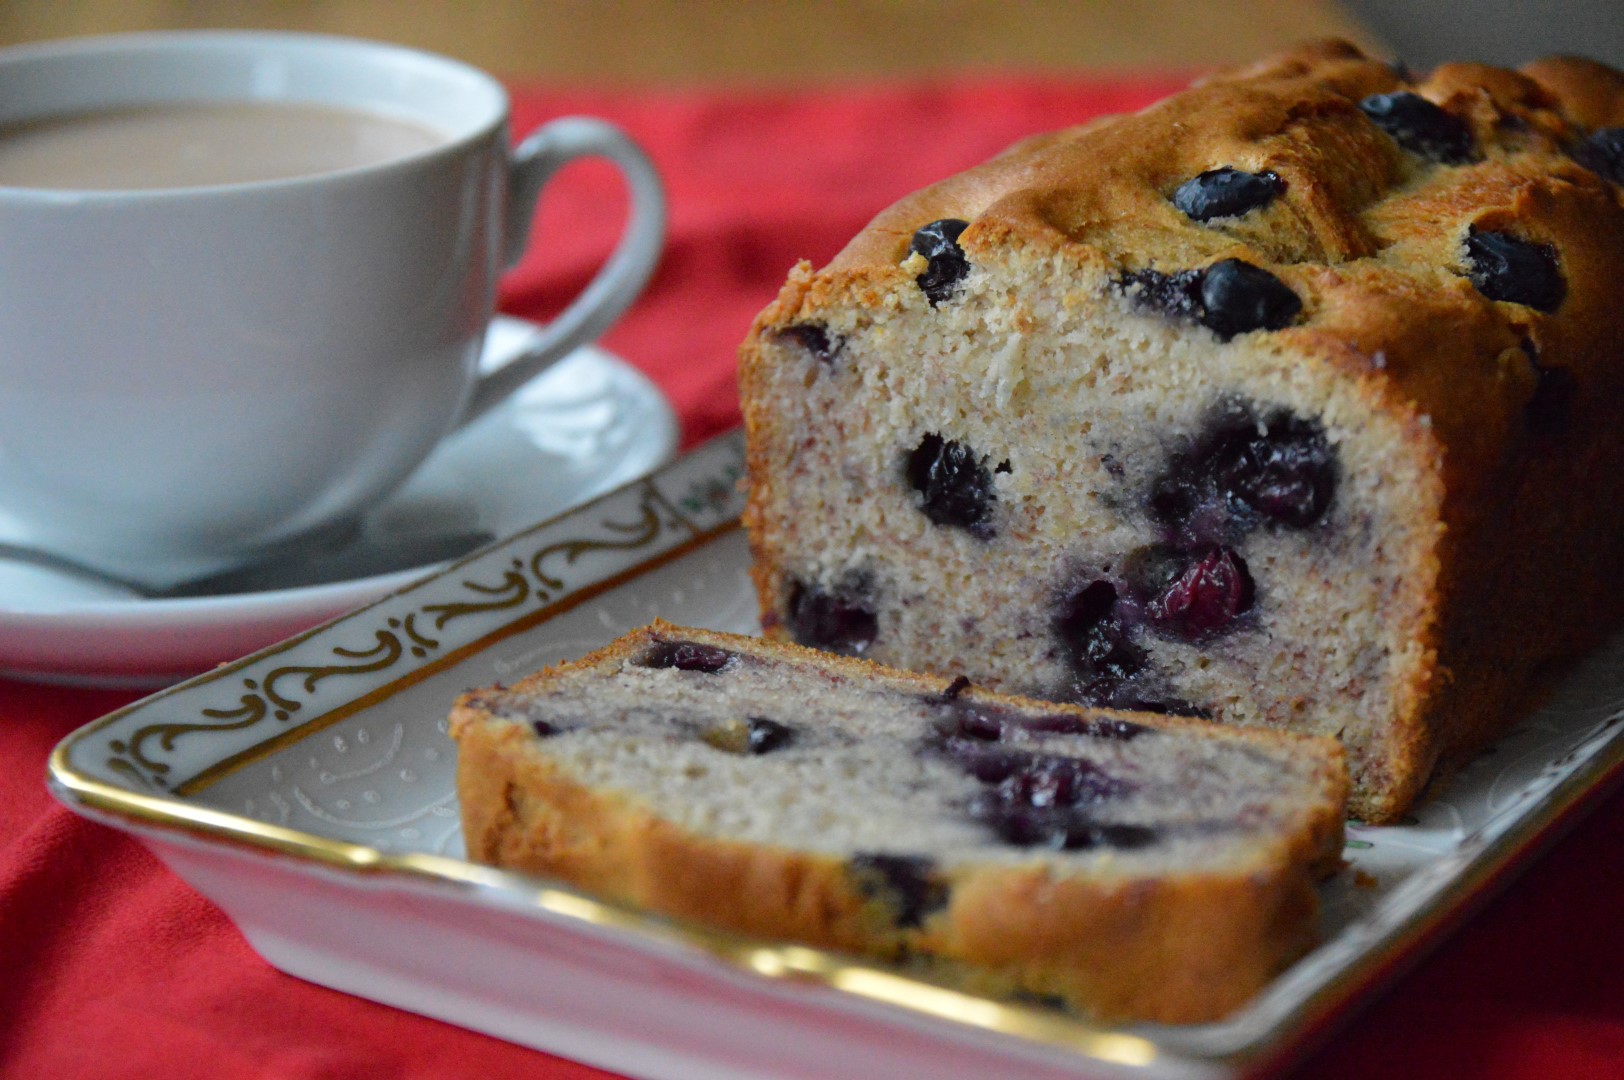 Blueberry tea loaf - gluten-free, wheat-free and deliciously light sponge bursting with fresh blueberries! www.intolerantgourmand.com